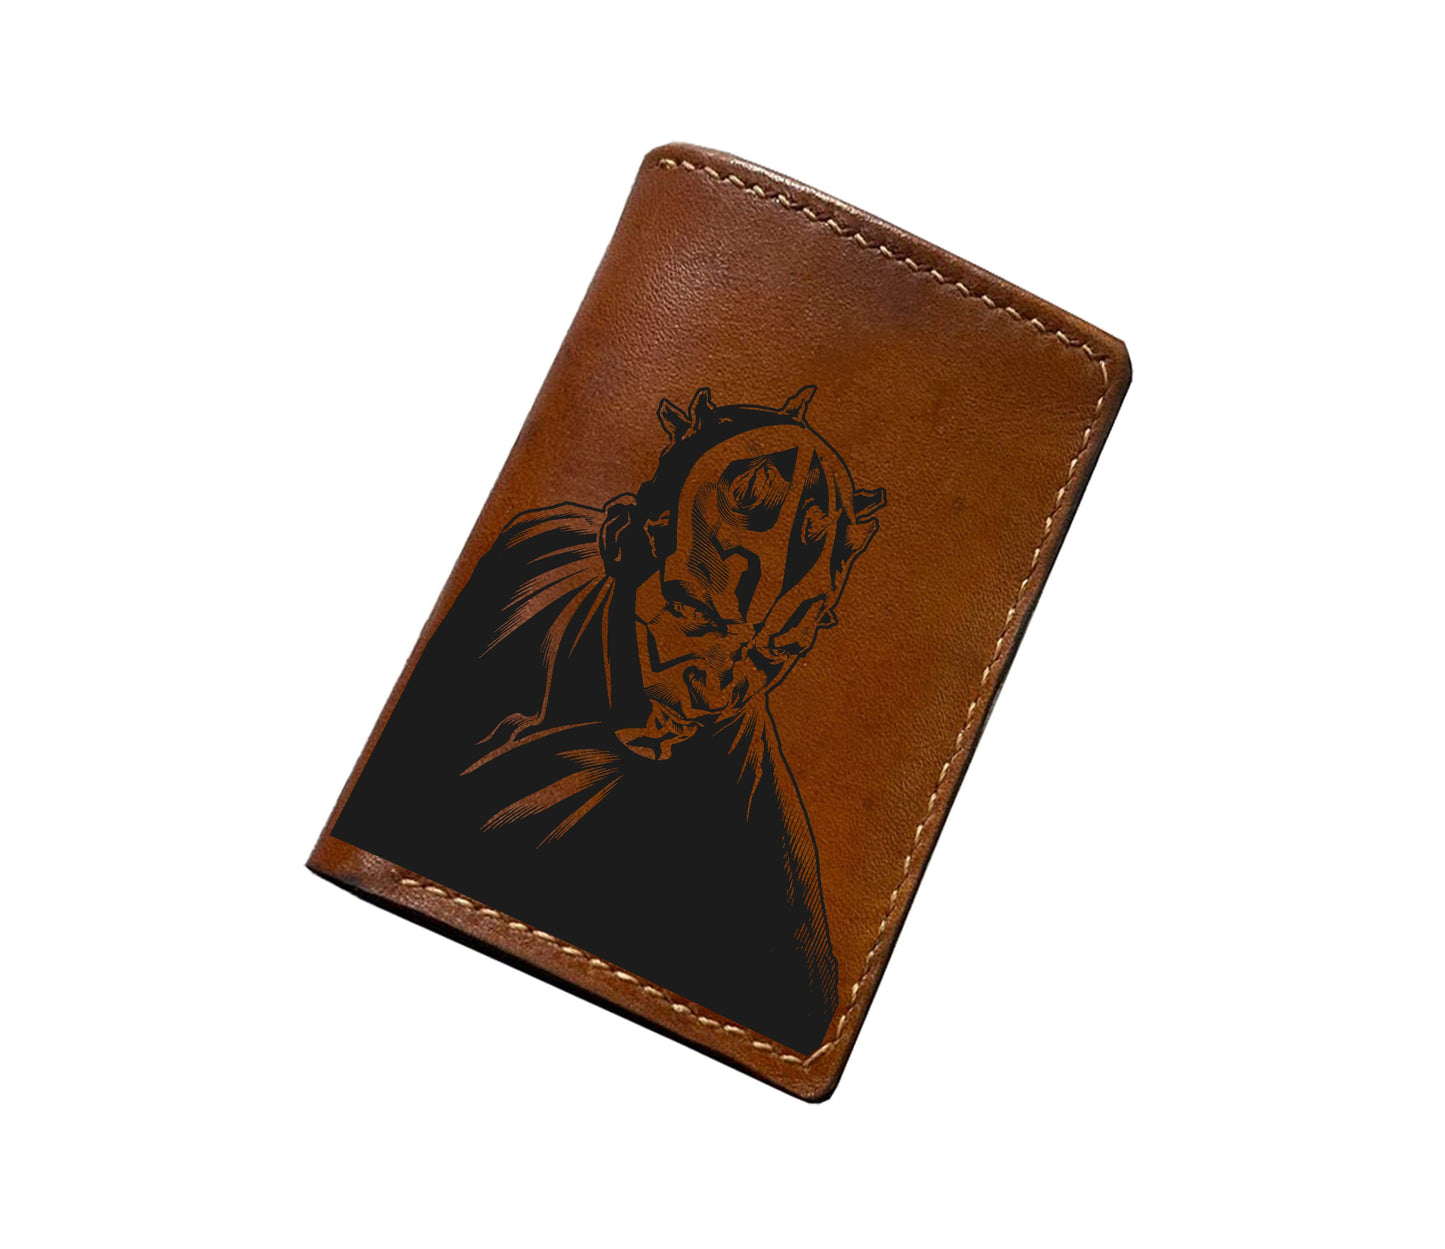 Personalized leather wallet, Starwars main characters cool wallet, unique christmas present ideas 2022 for men